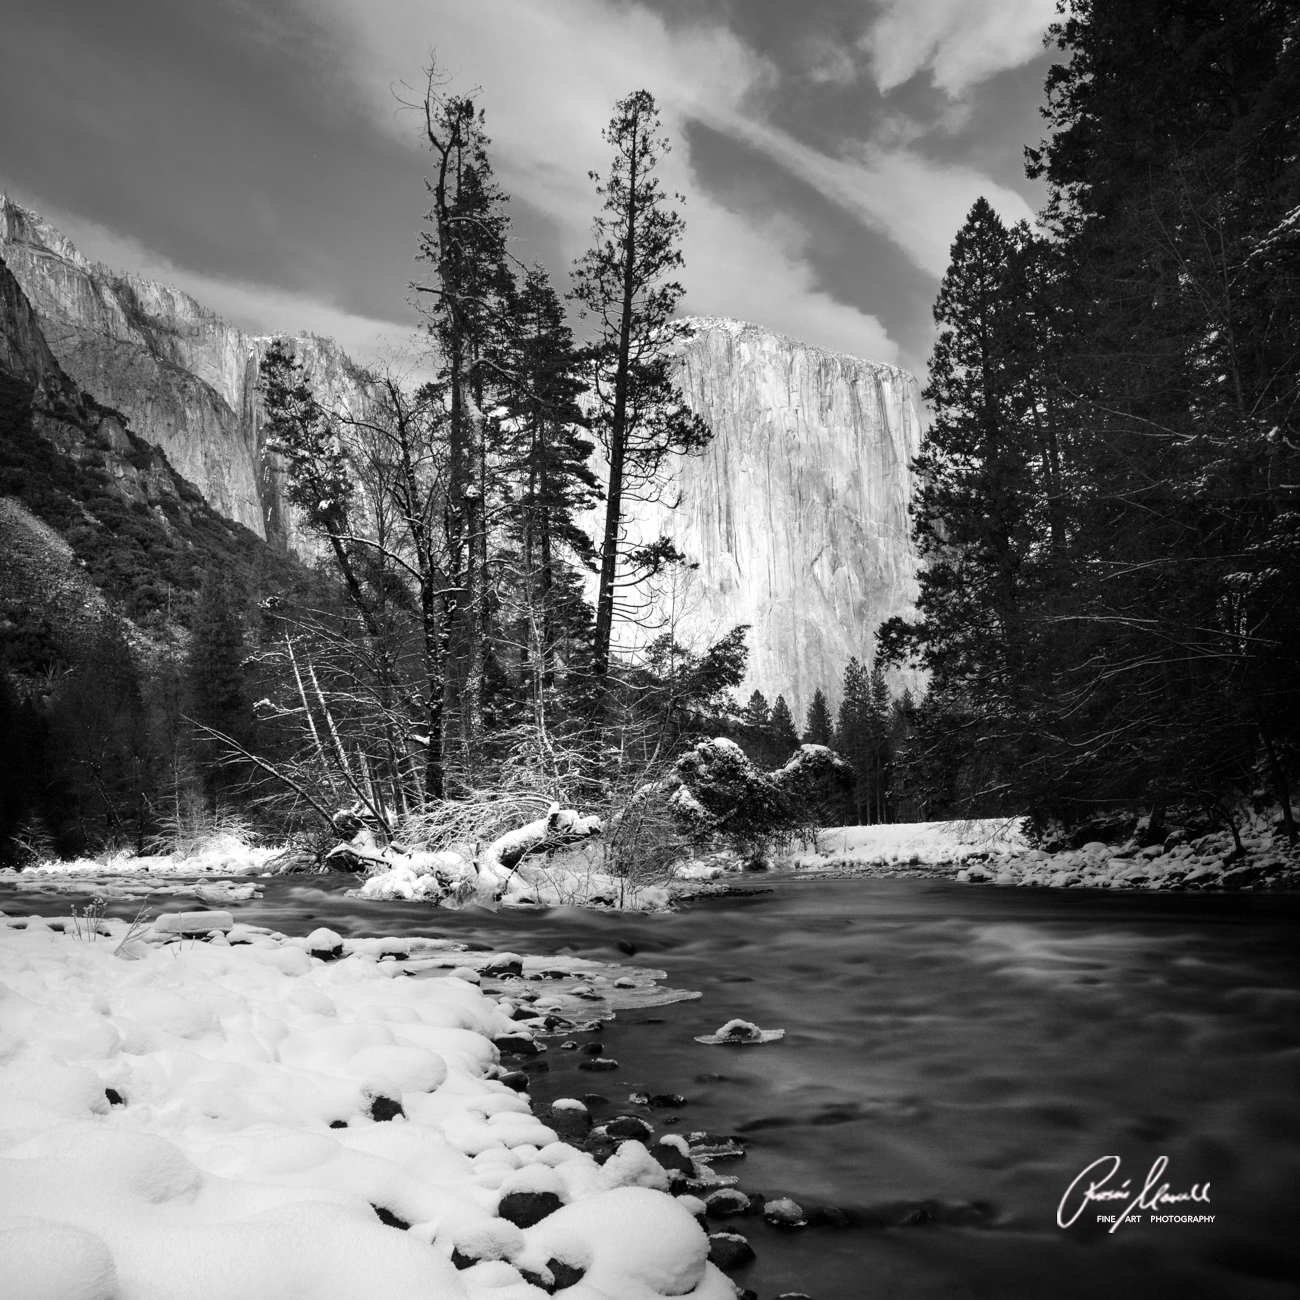 Contrast between the snow and dark trees in winter at Valley View in Yosemite after a snowstorm.